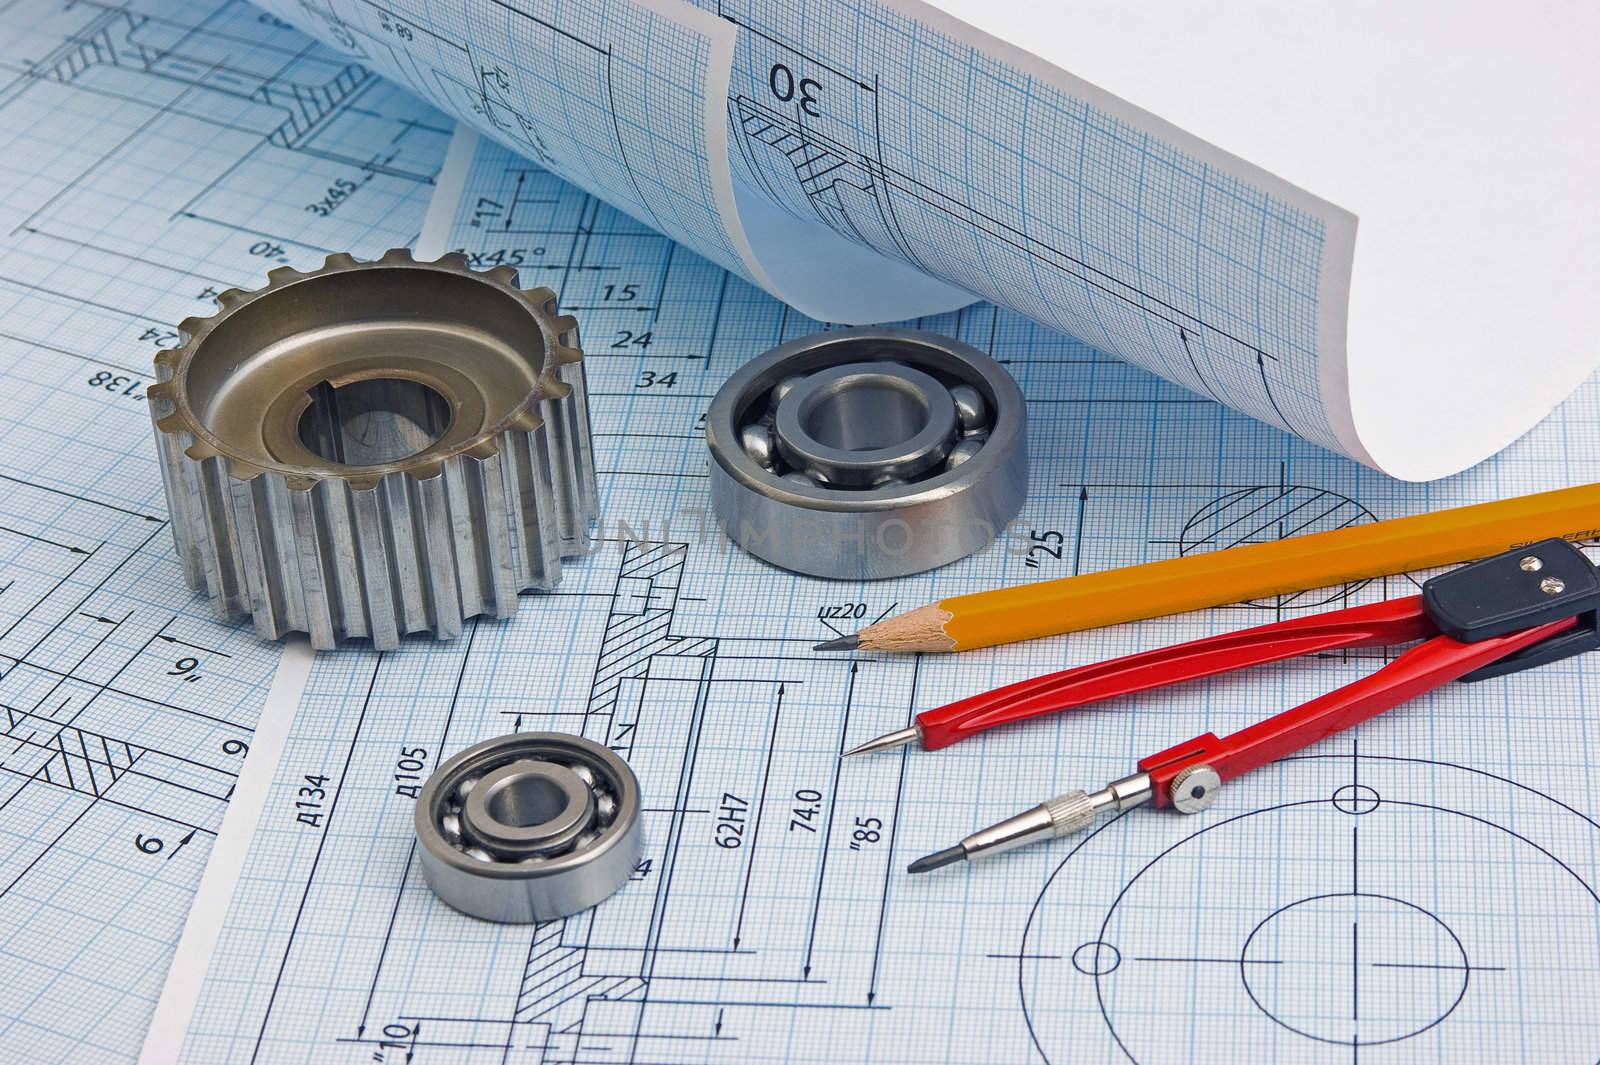 tools and mechanisms detail on the background of technical drawings